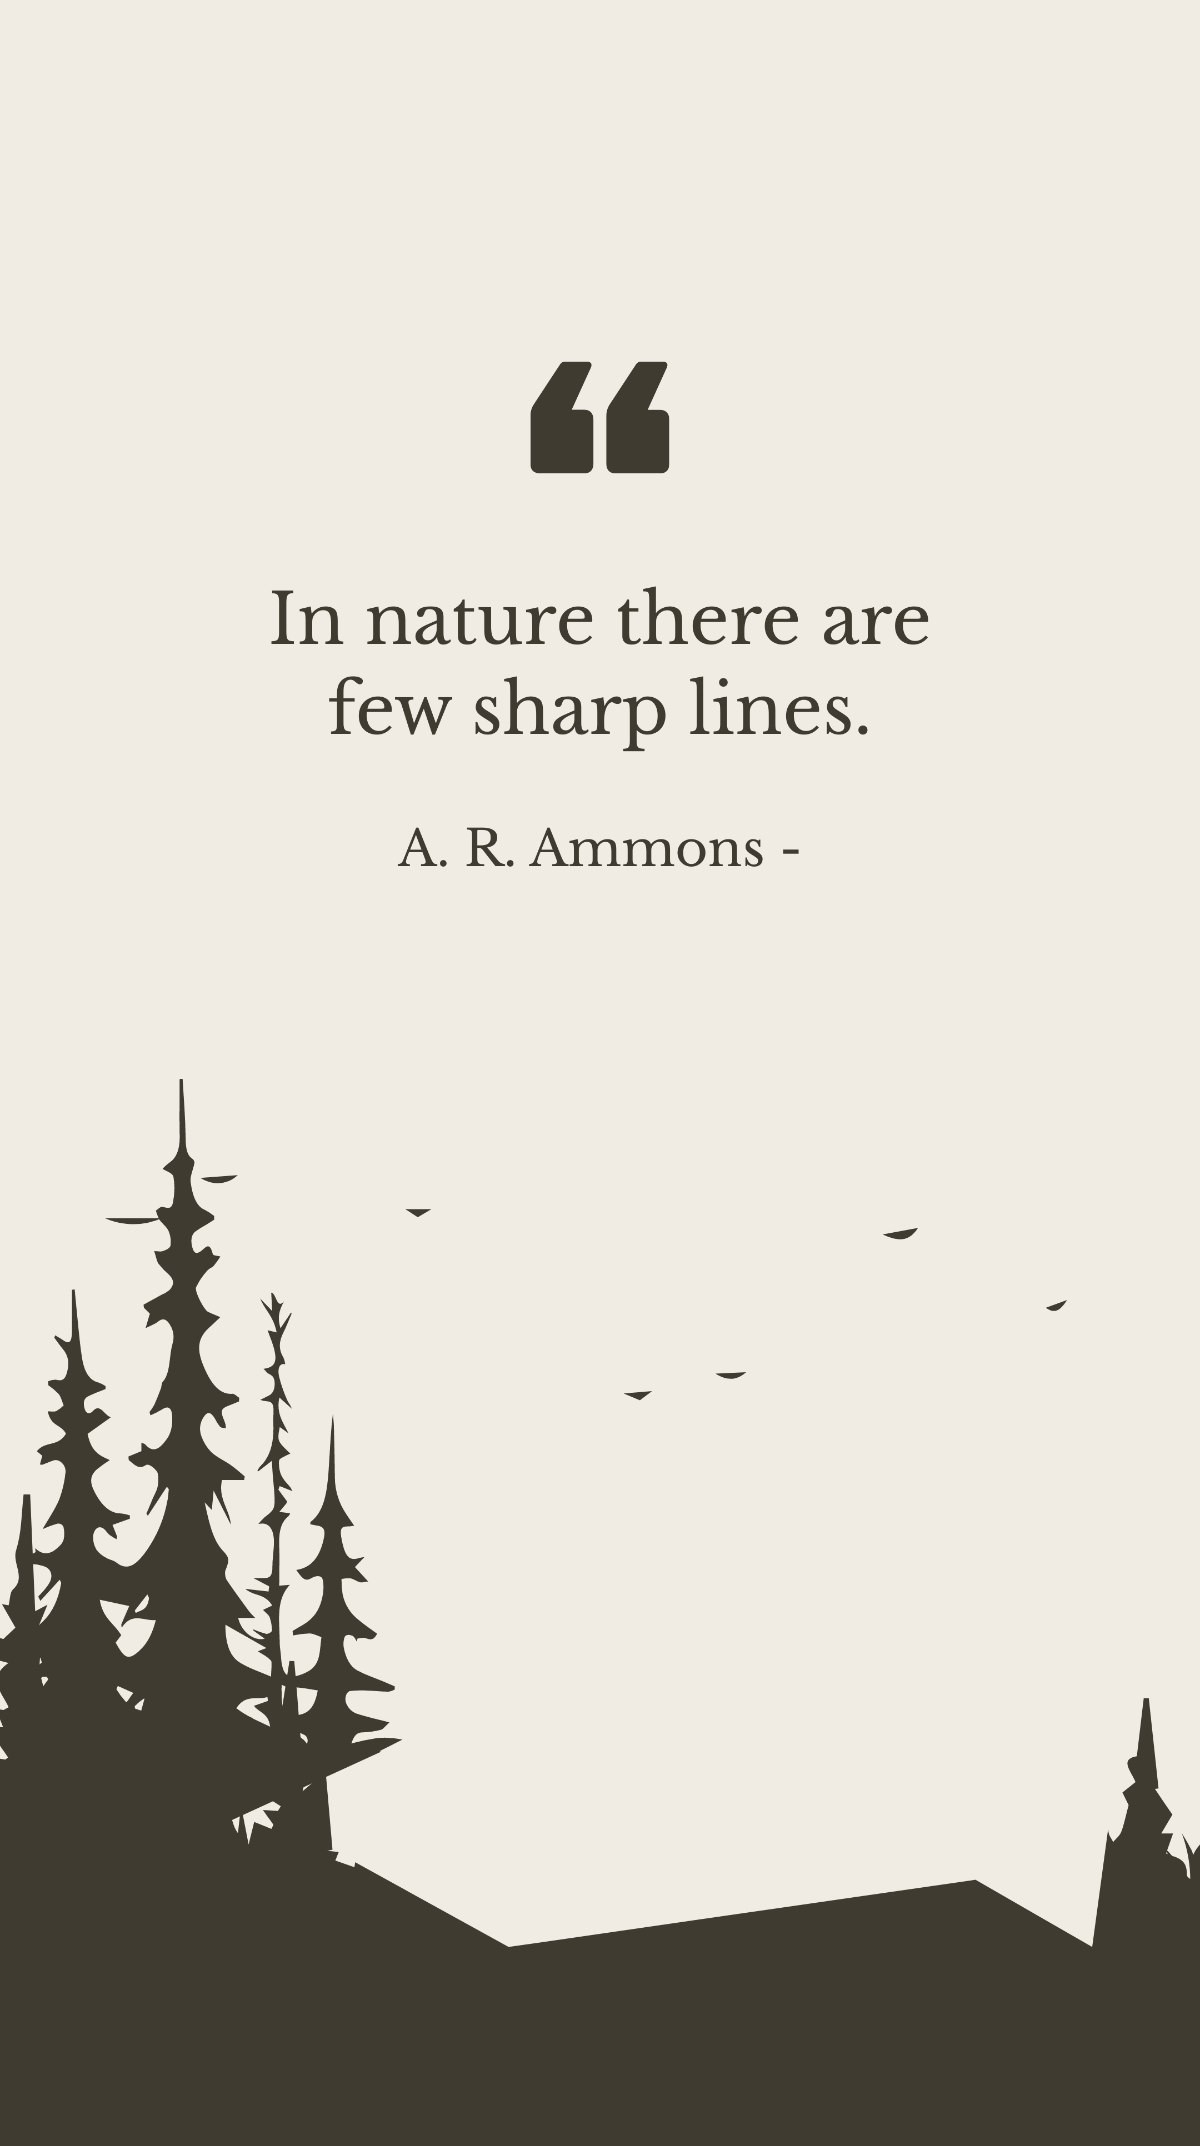 A. R. Ammons - In nature there are few sharp lines. Template